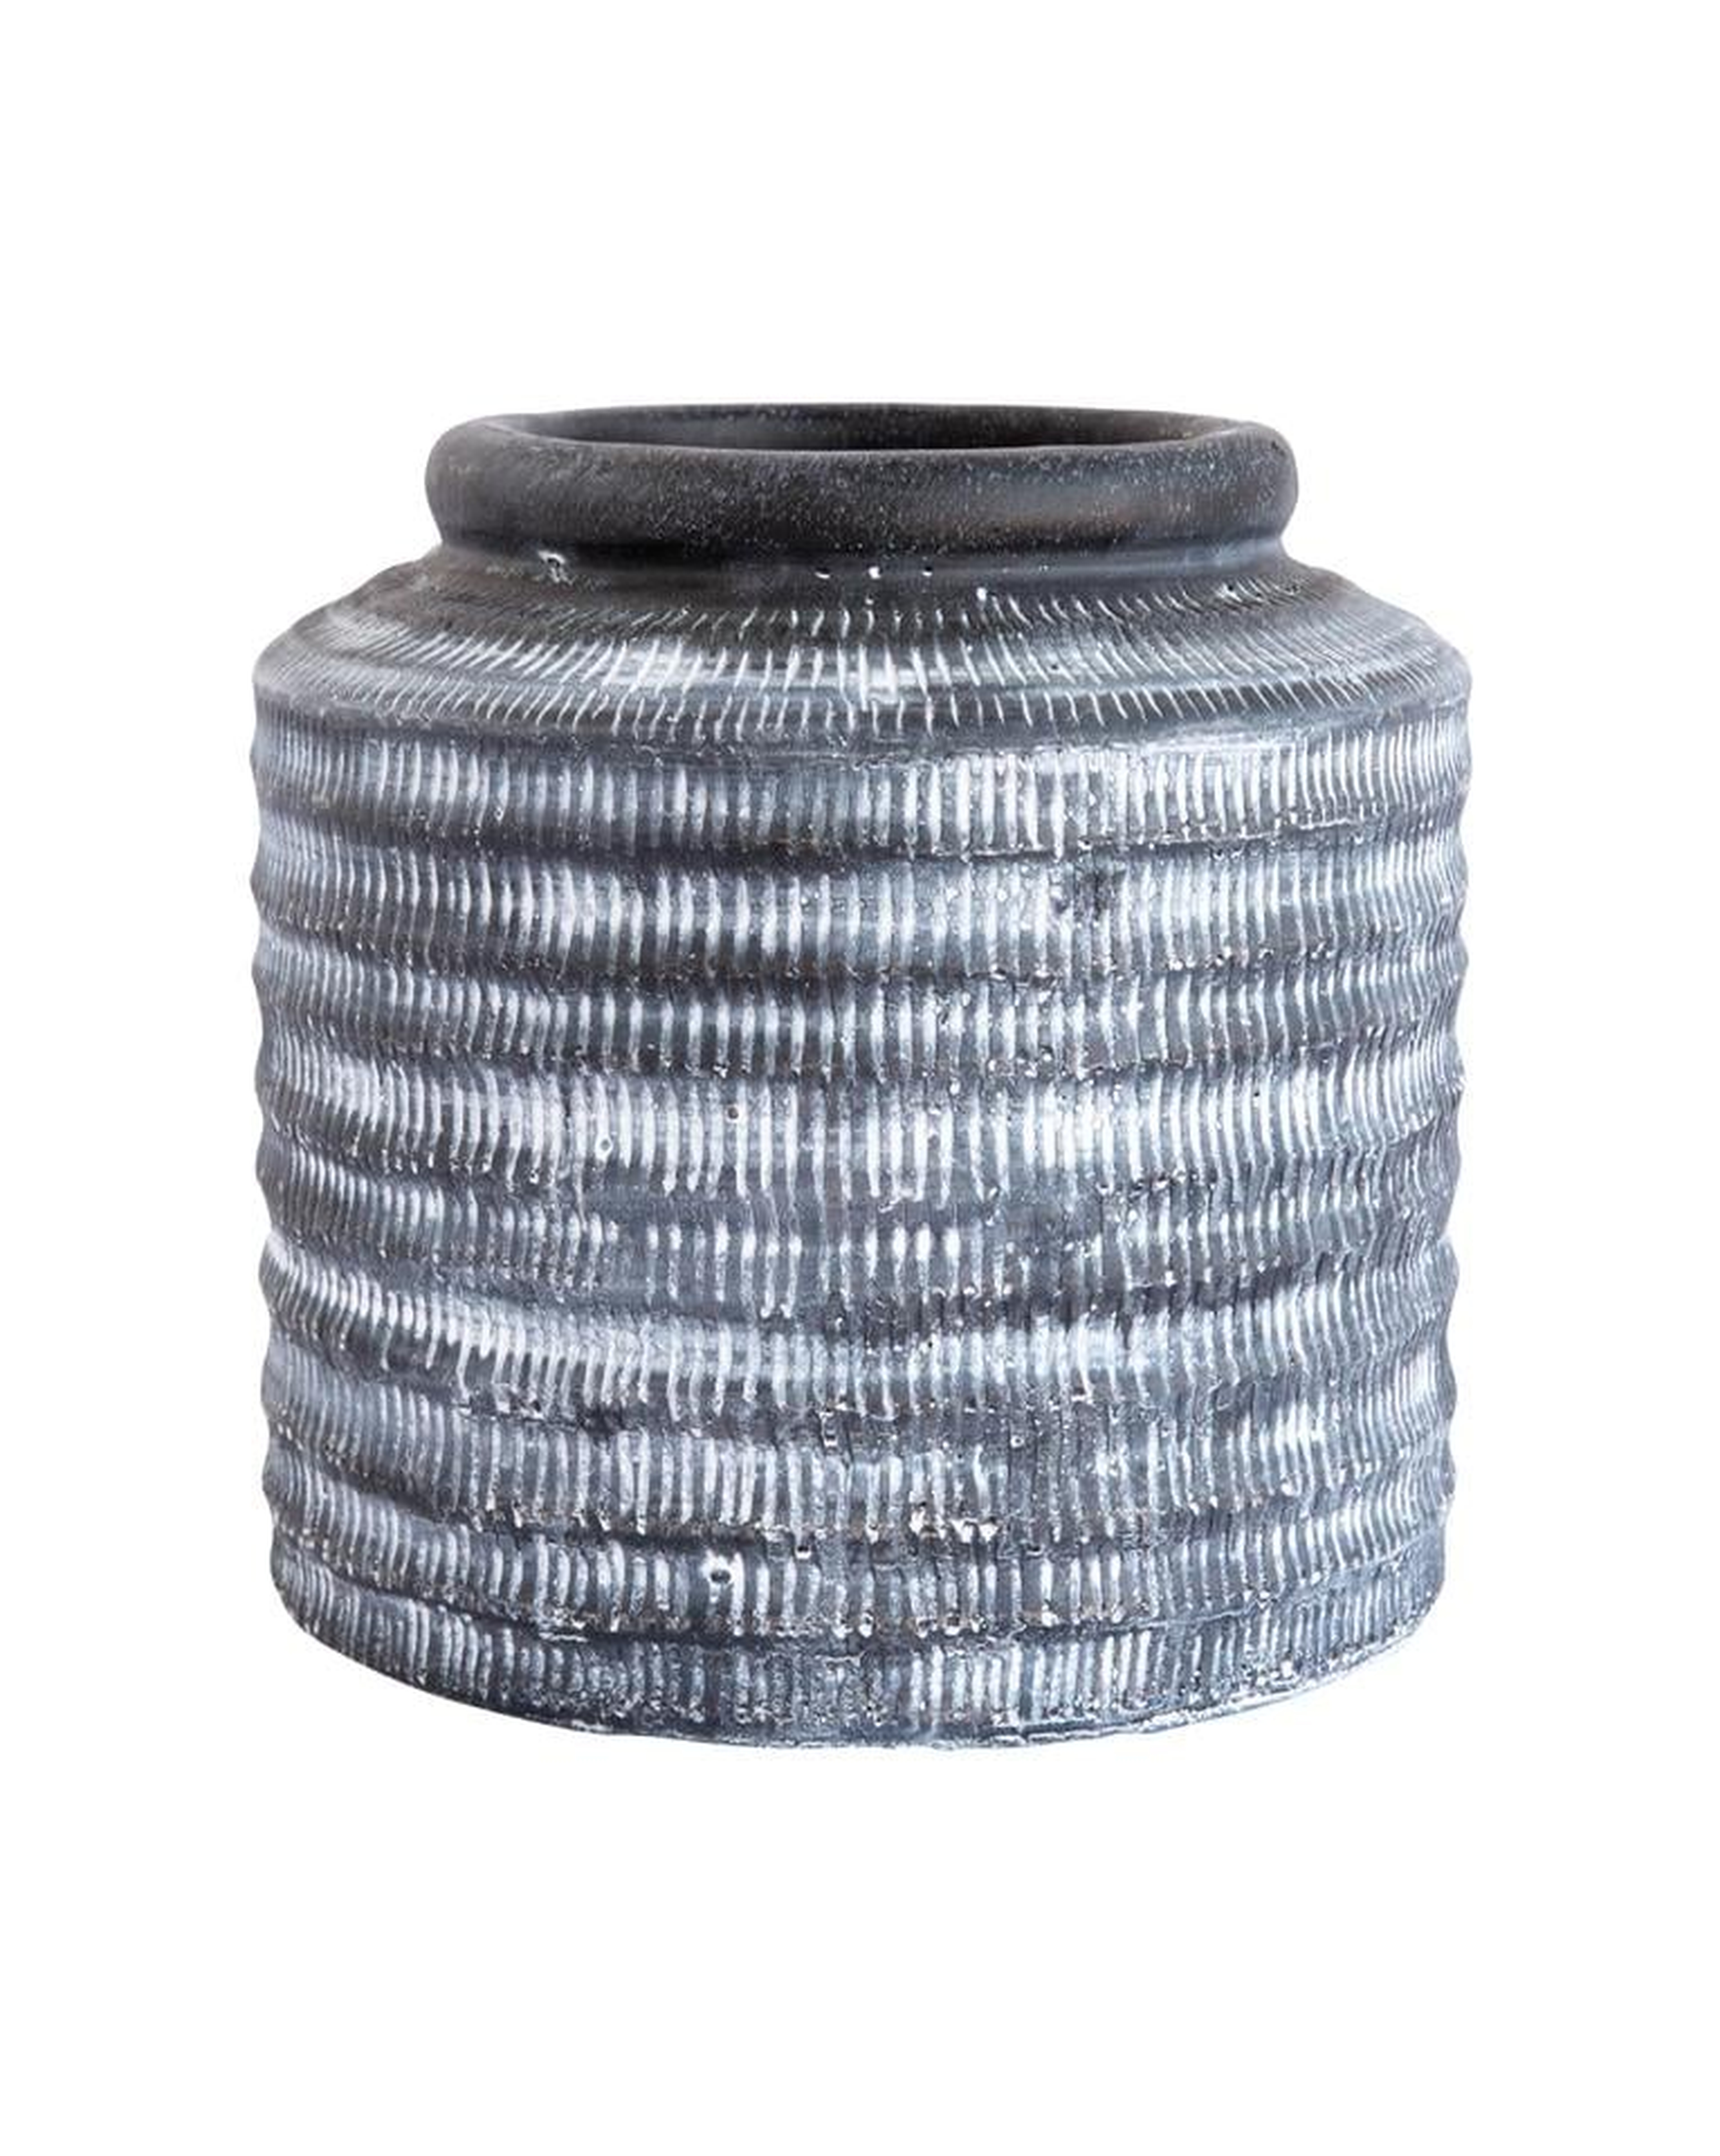 GRAY WASHED POT - SMALL - McGee & Co.